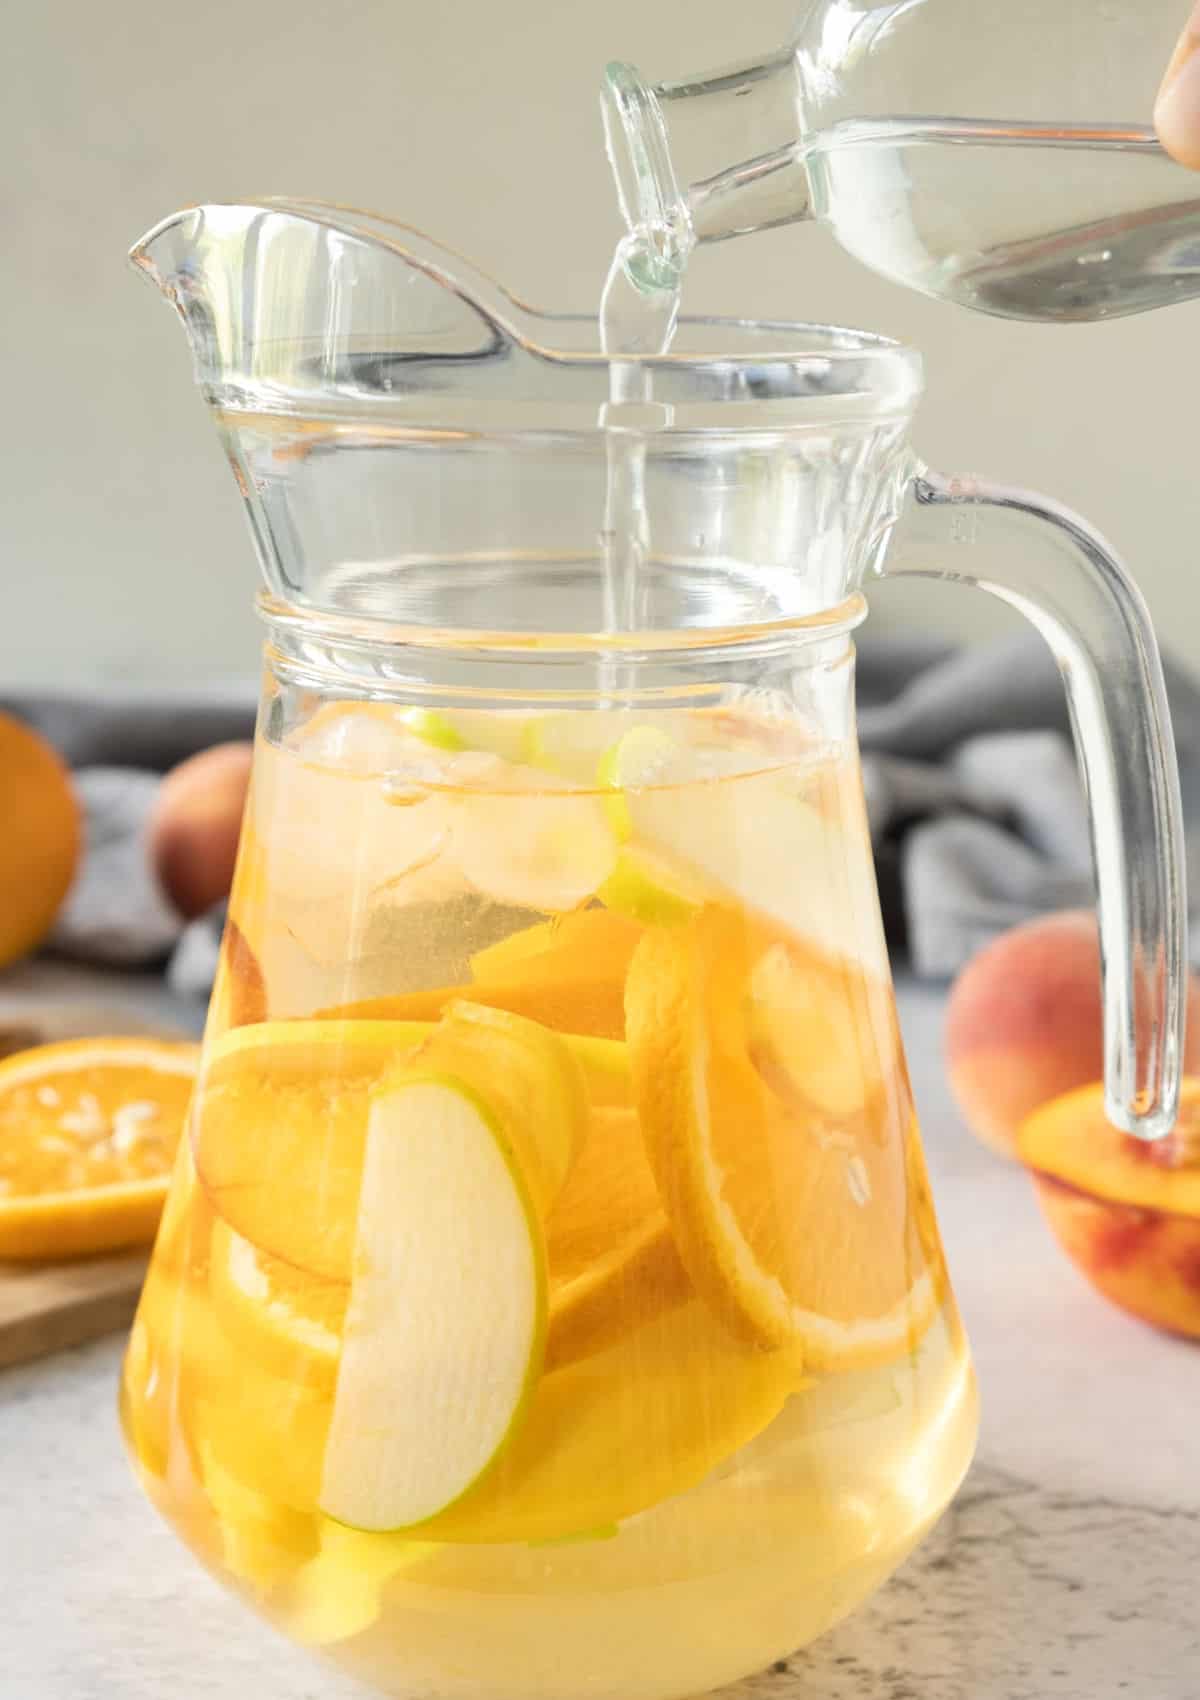 Sliced fruit and ice in a pitcher. Liquid being poured in. Grey surface and background.